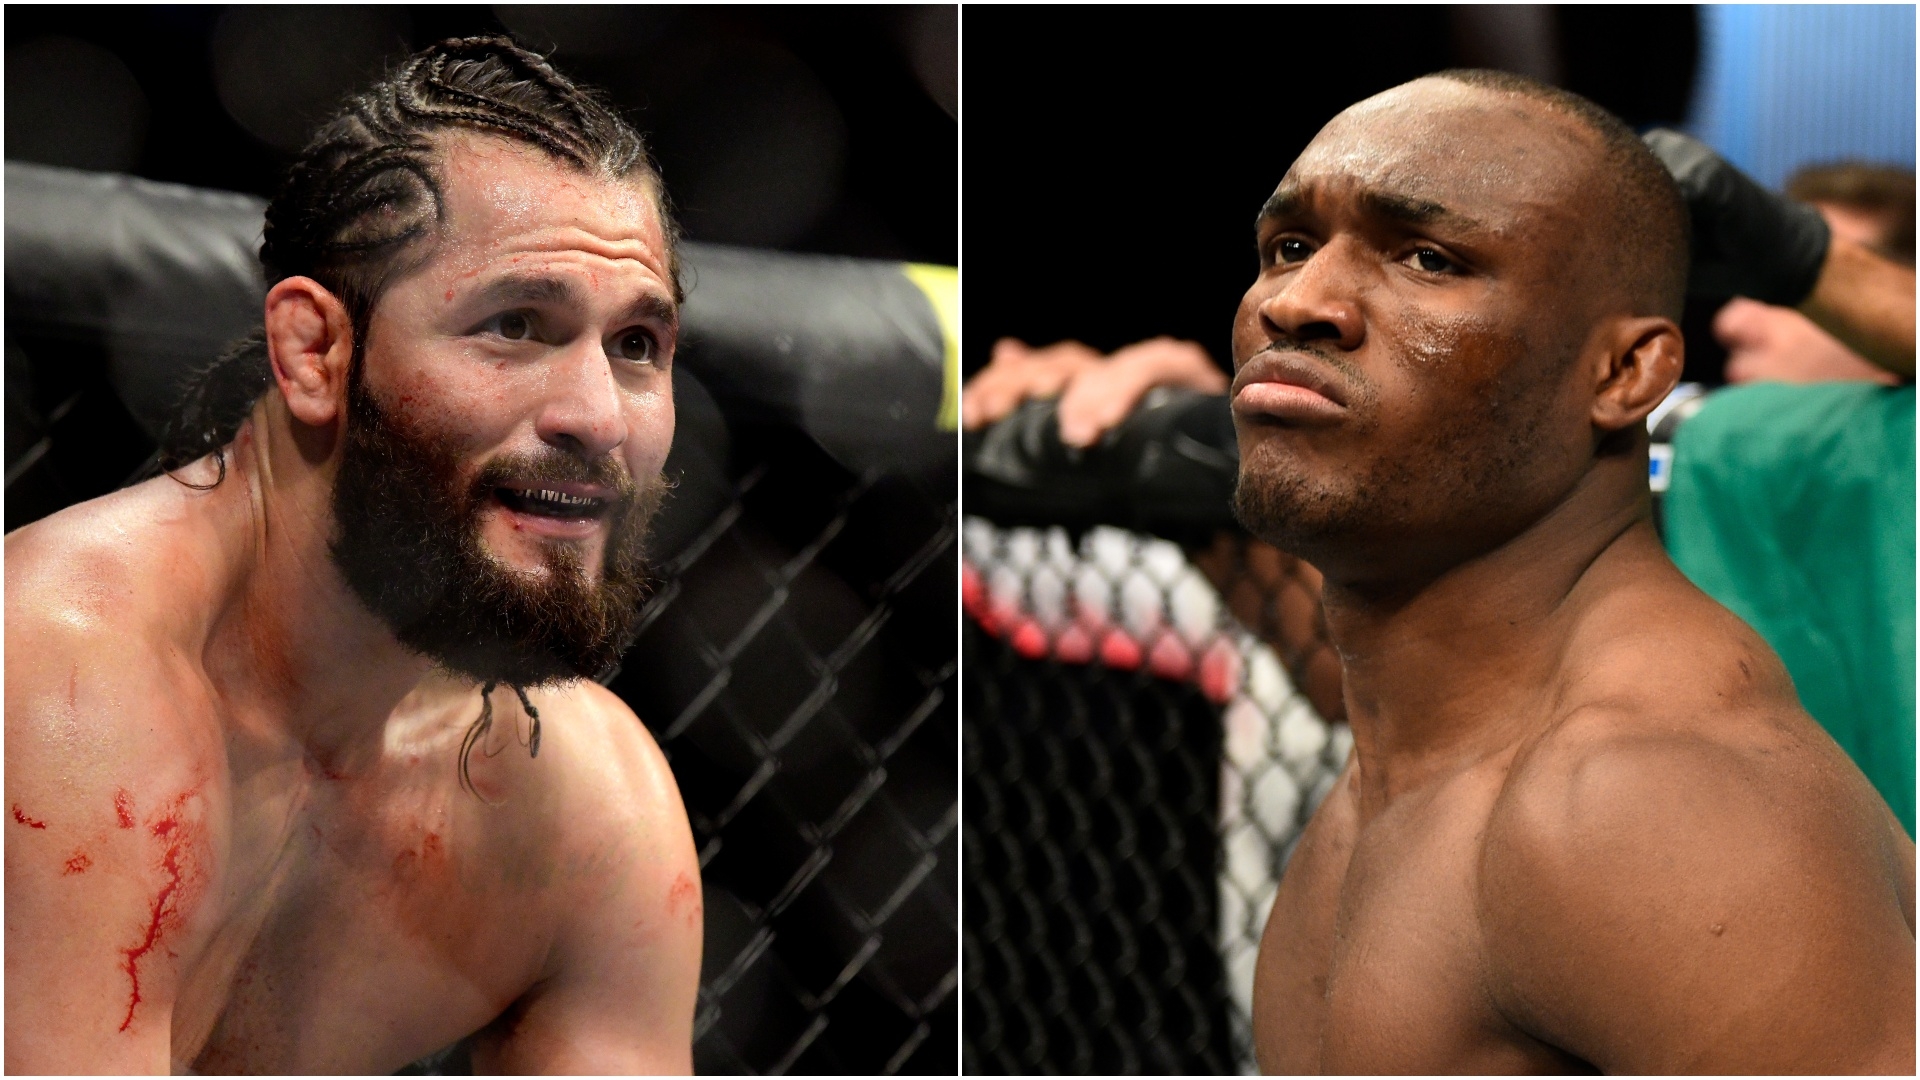 How Usman, Masvidal came to agreement to fight at UFC 251 - Stream the Video